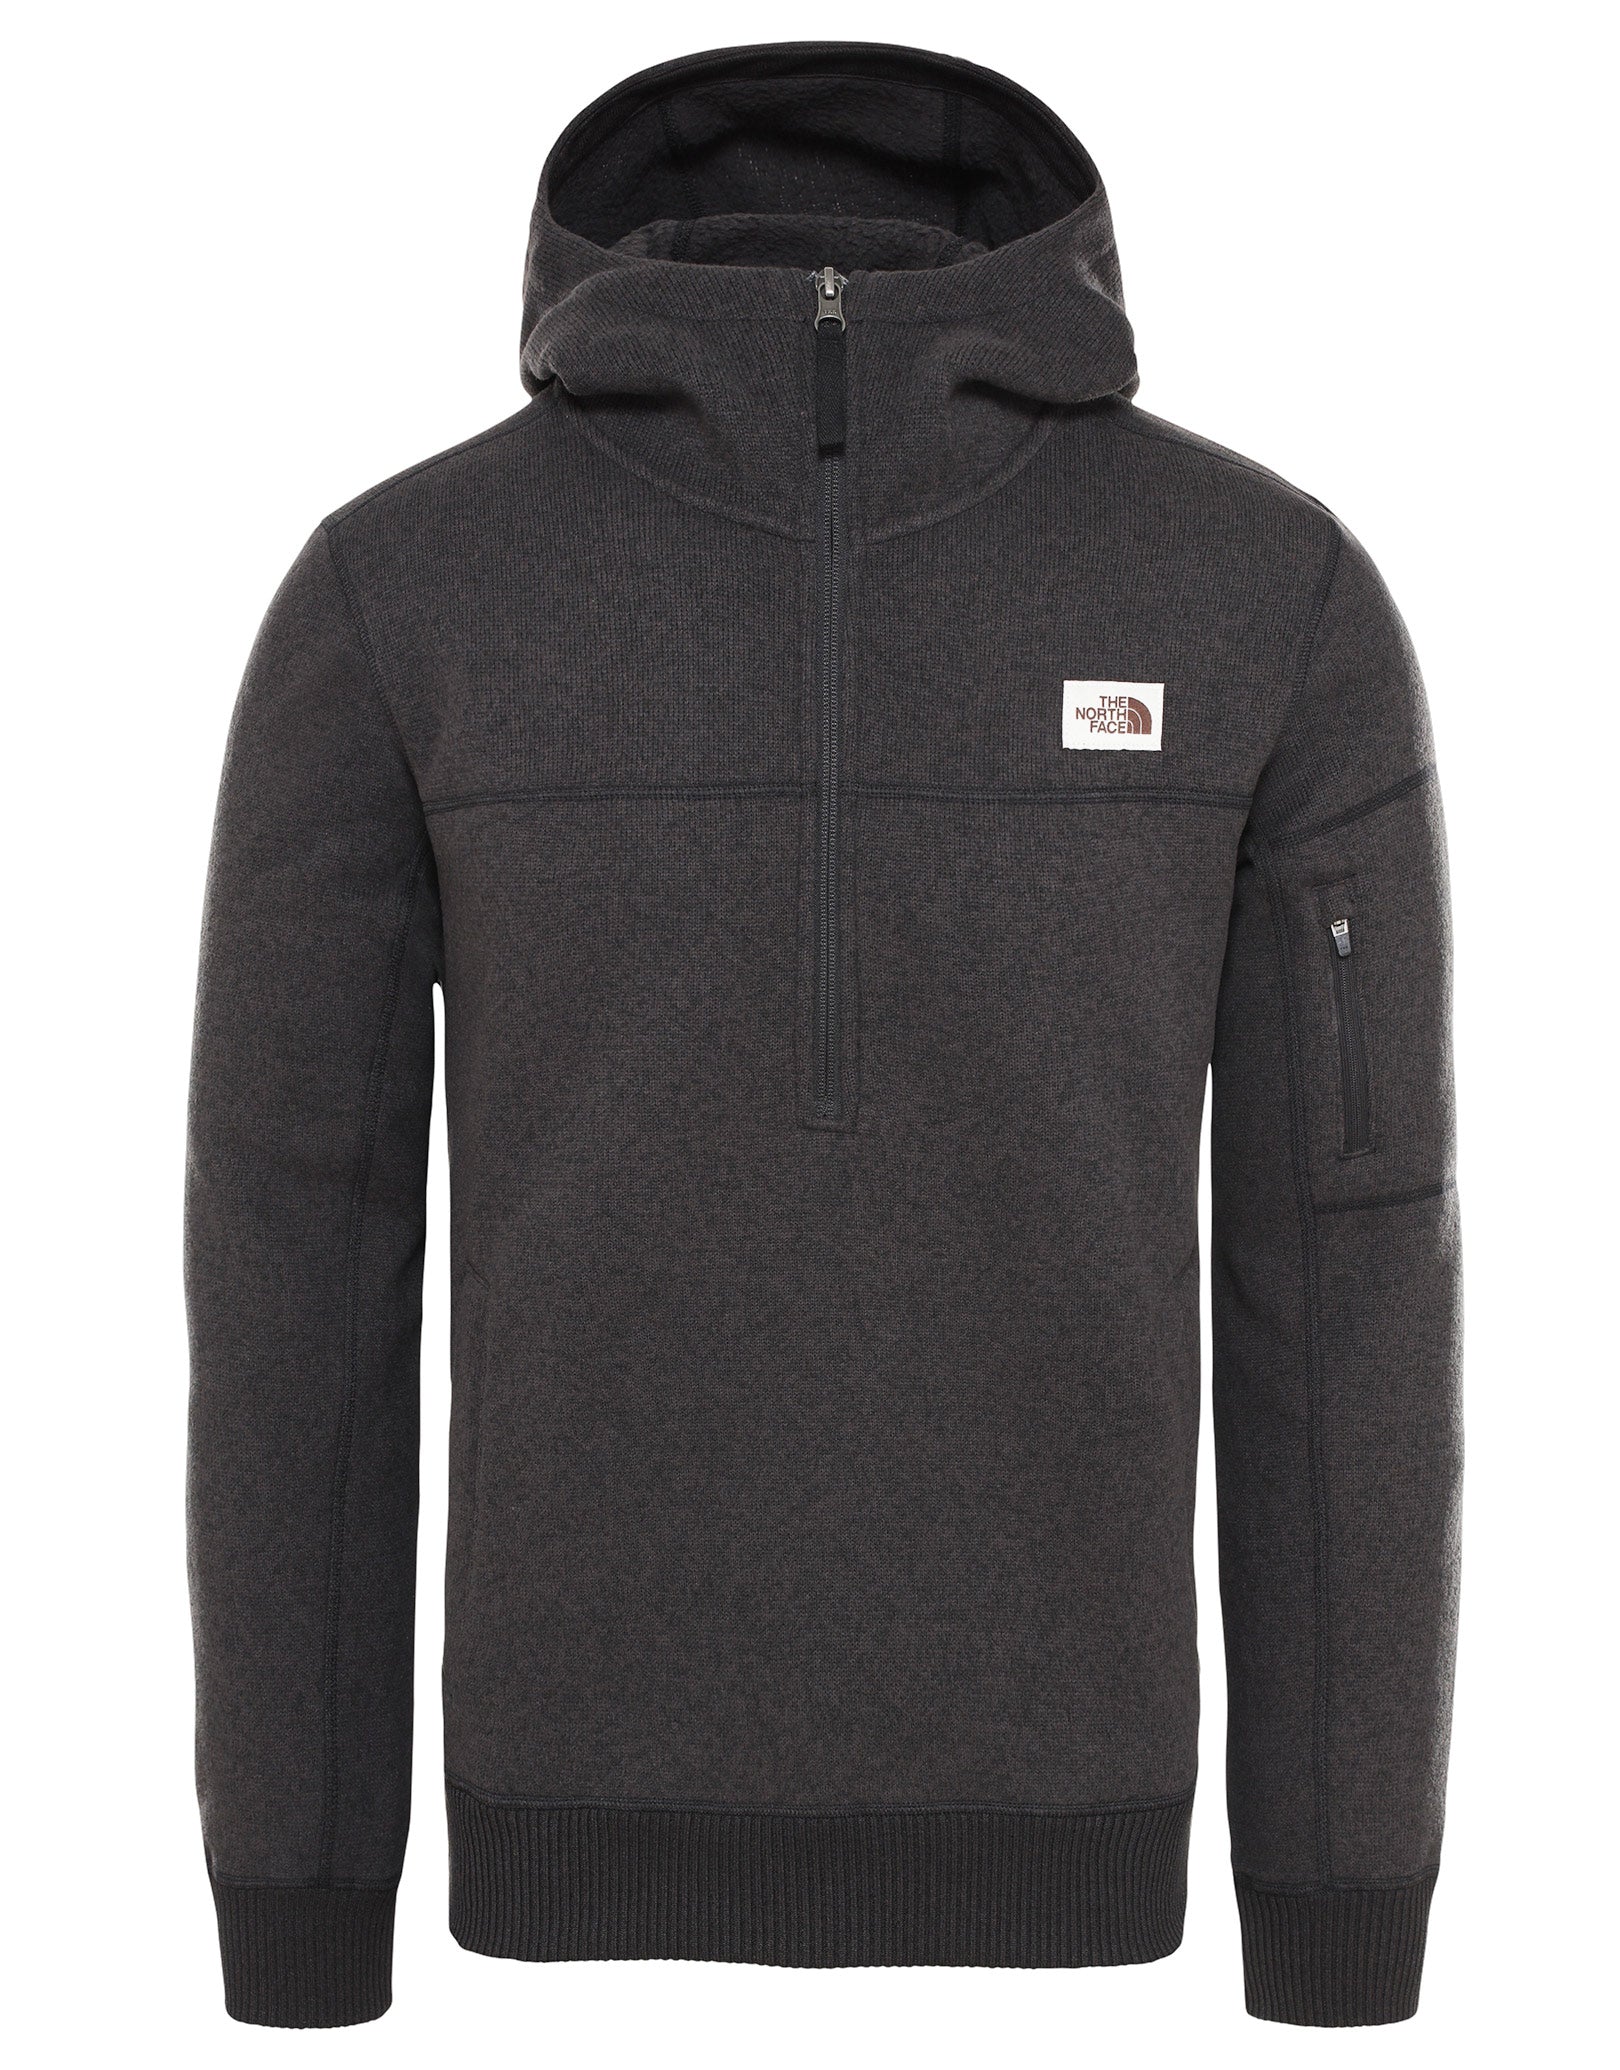 north face winter sweater